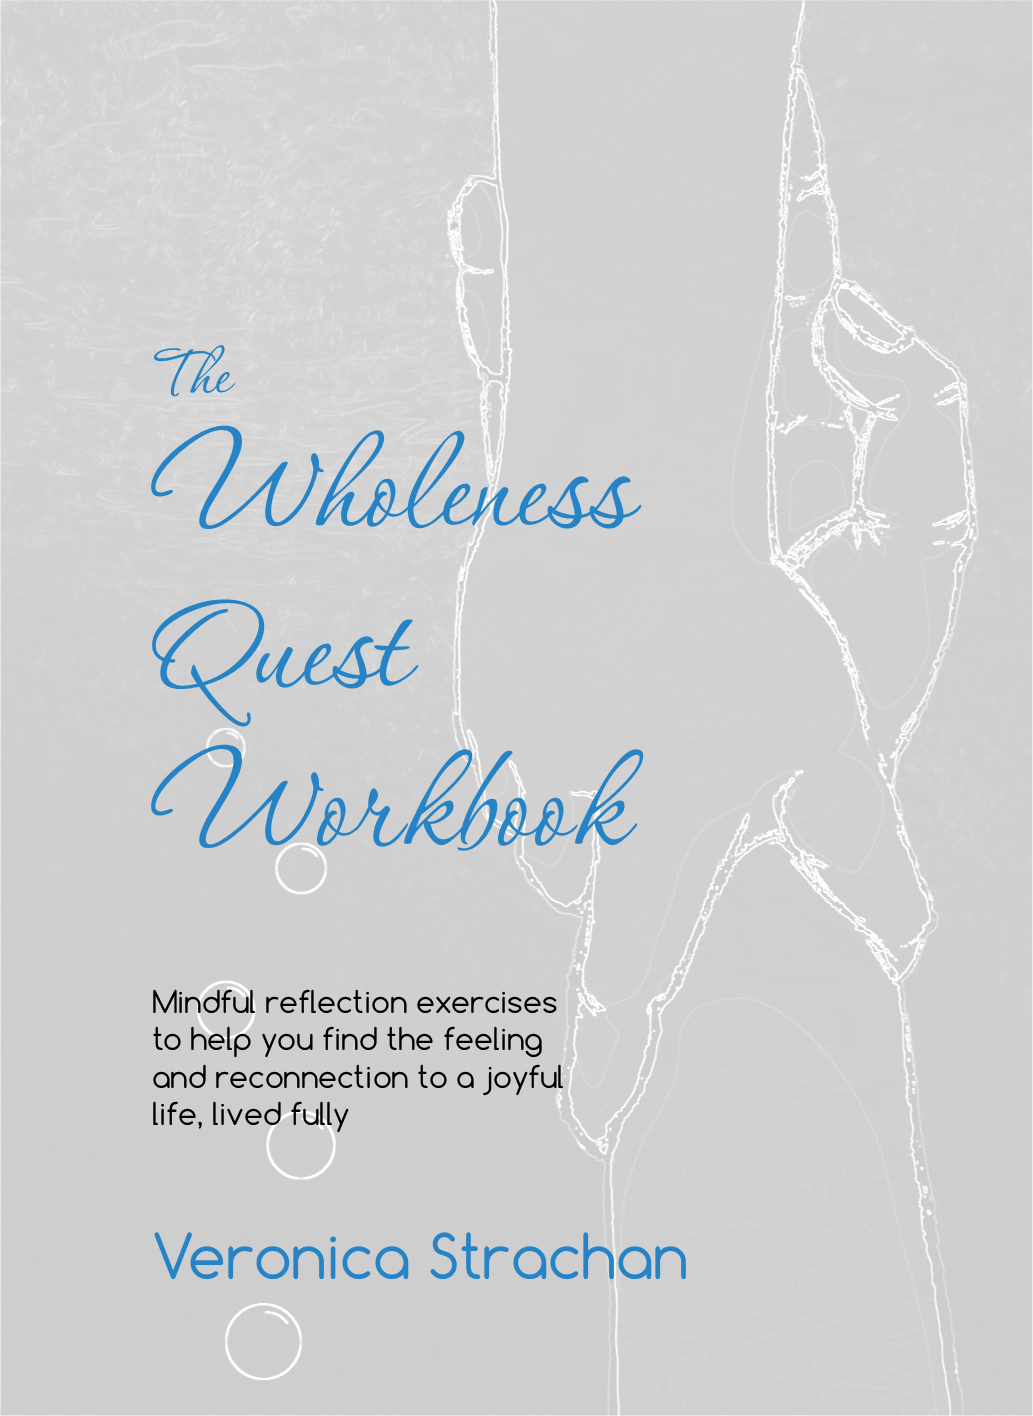 The Wholeness Quest Workbook